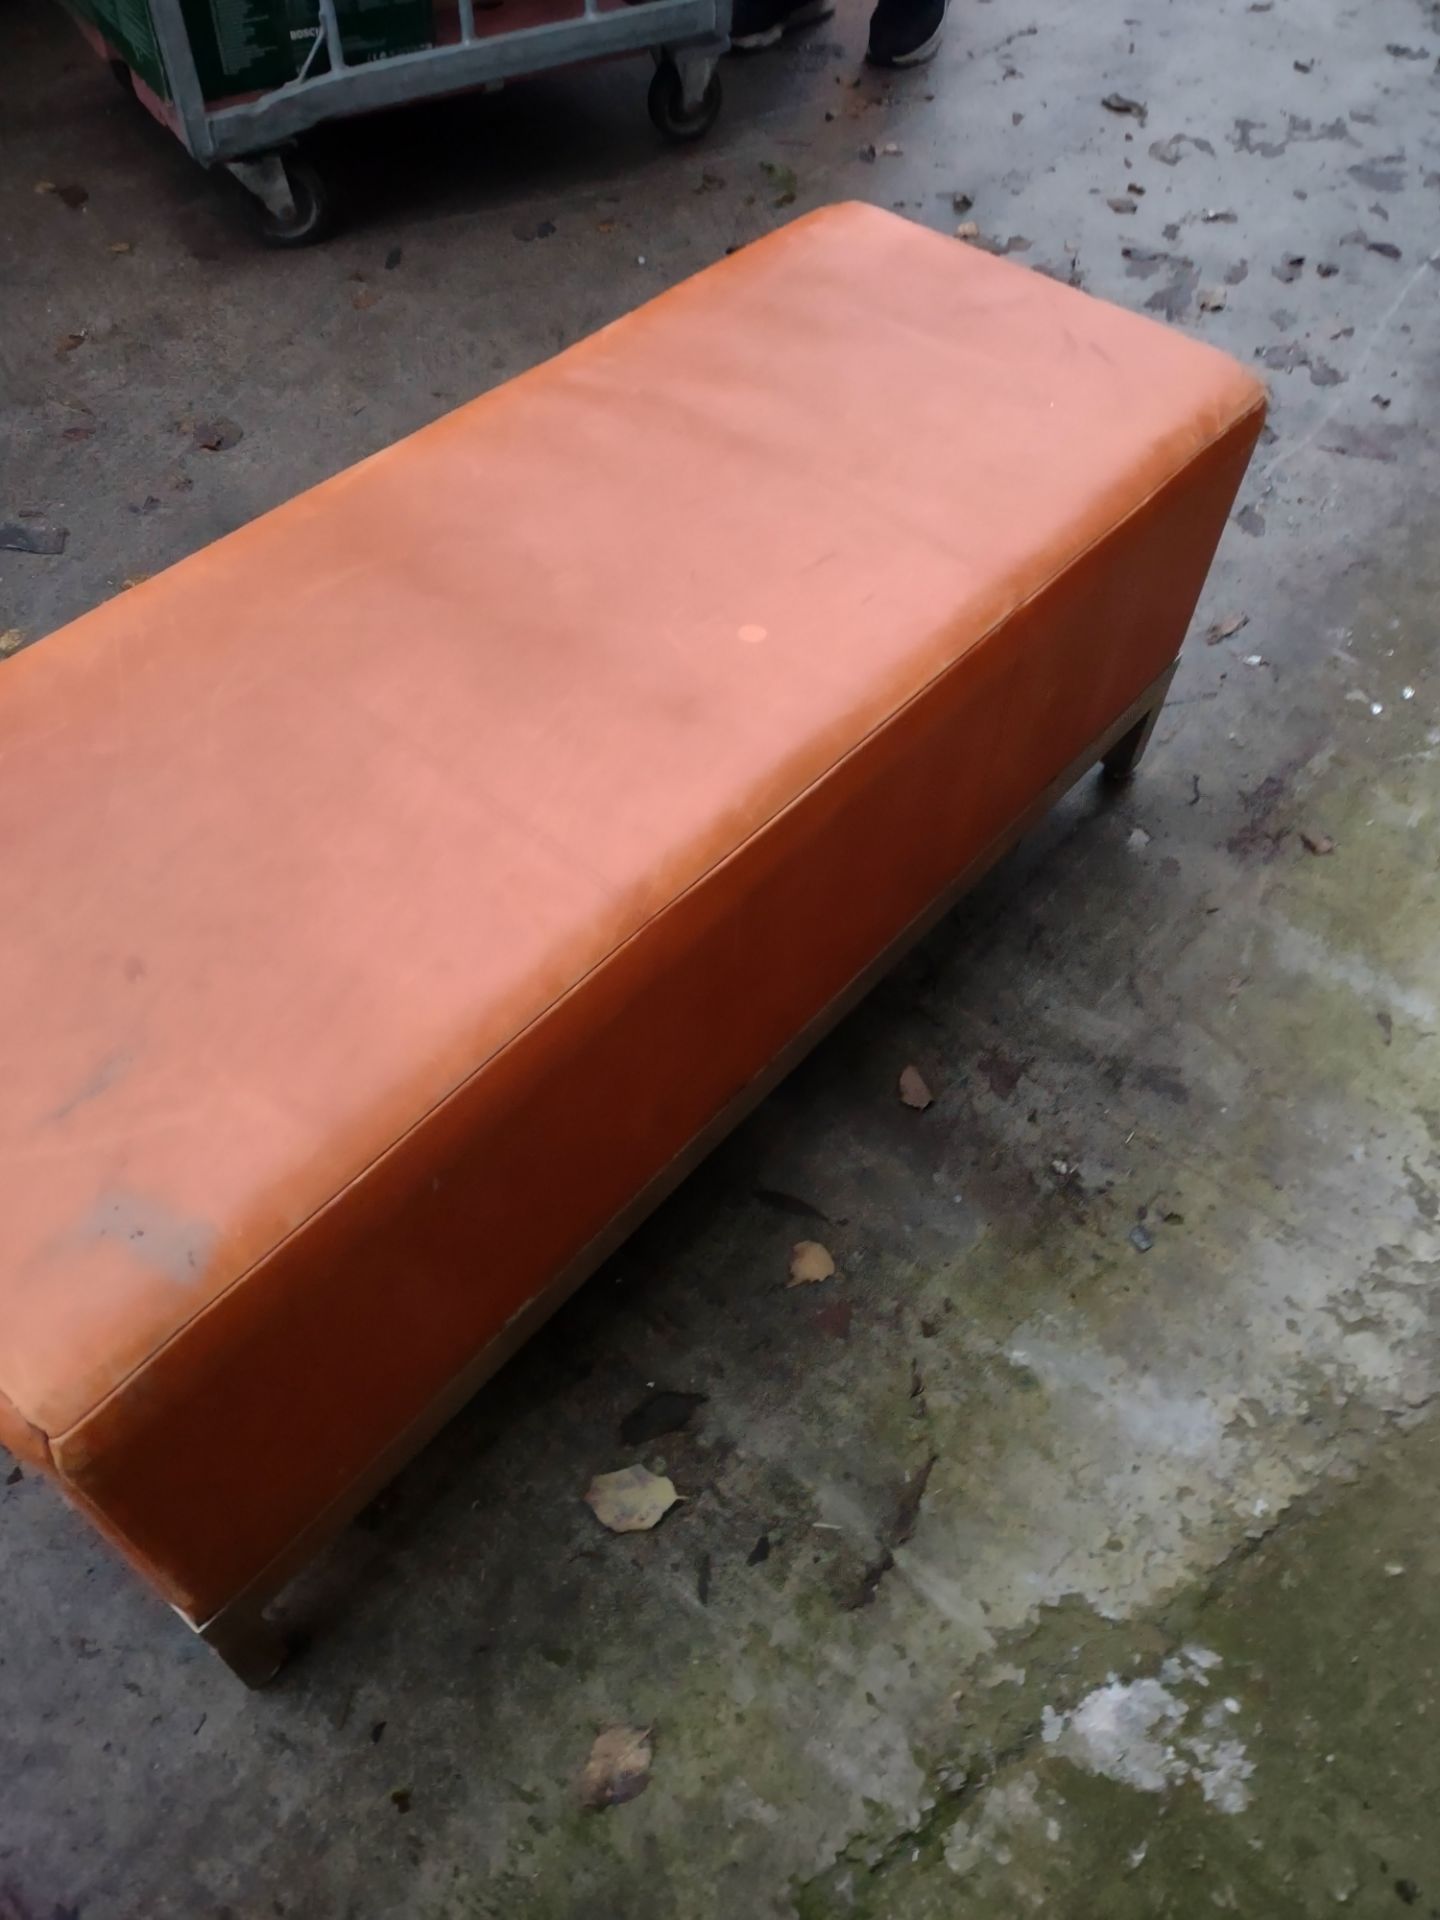 Vintage Look Leather Foot Stool 113*44*44cm Sourced From Luxury House Clearance - Image 2 of 4